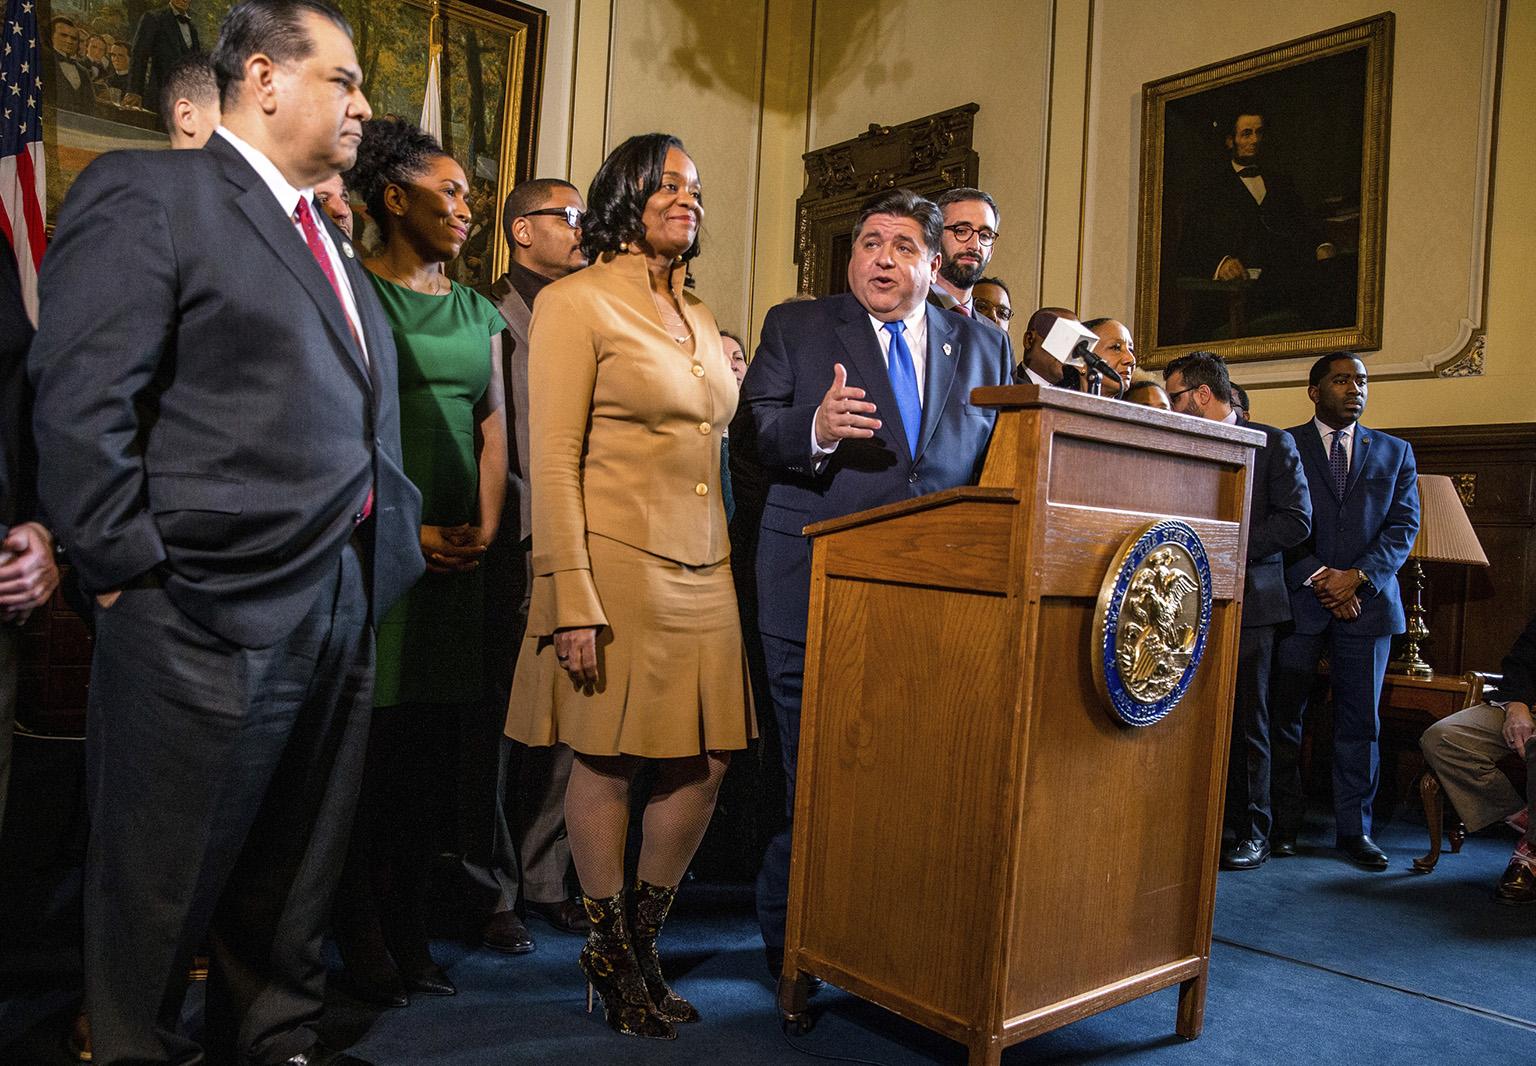 Gov. J.B. Pritzker gives his opening remarks along with state Sen. Kimberly Lightford, D-Maywood, left, on Senate Bill 1, a bill sponsored by Lightford to raise the state’s minimum wage to 5 an hour by 2025, after it passed the Illinois Senate during a press conference in the governor’s office at the Illinois state Capitol, Thursday, Feb. 7, 2019. (Justin L. Fowler / The State Journal-Register via AP)